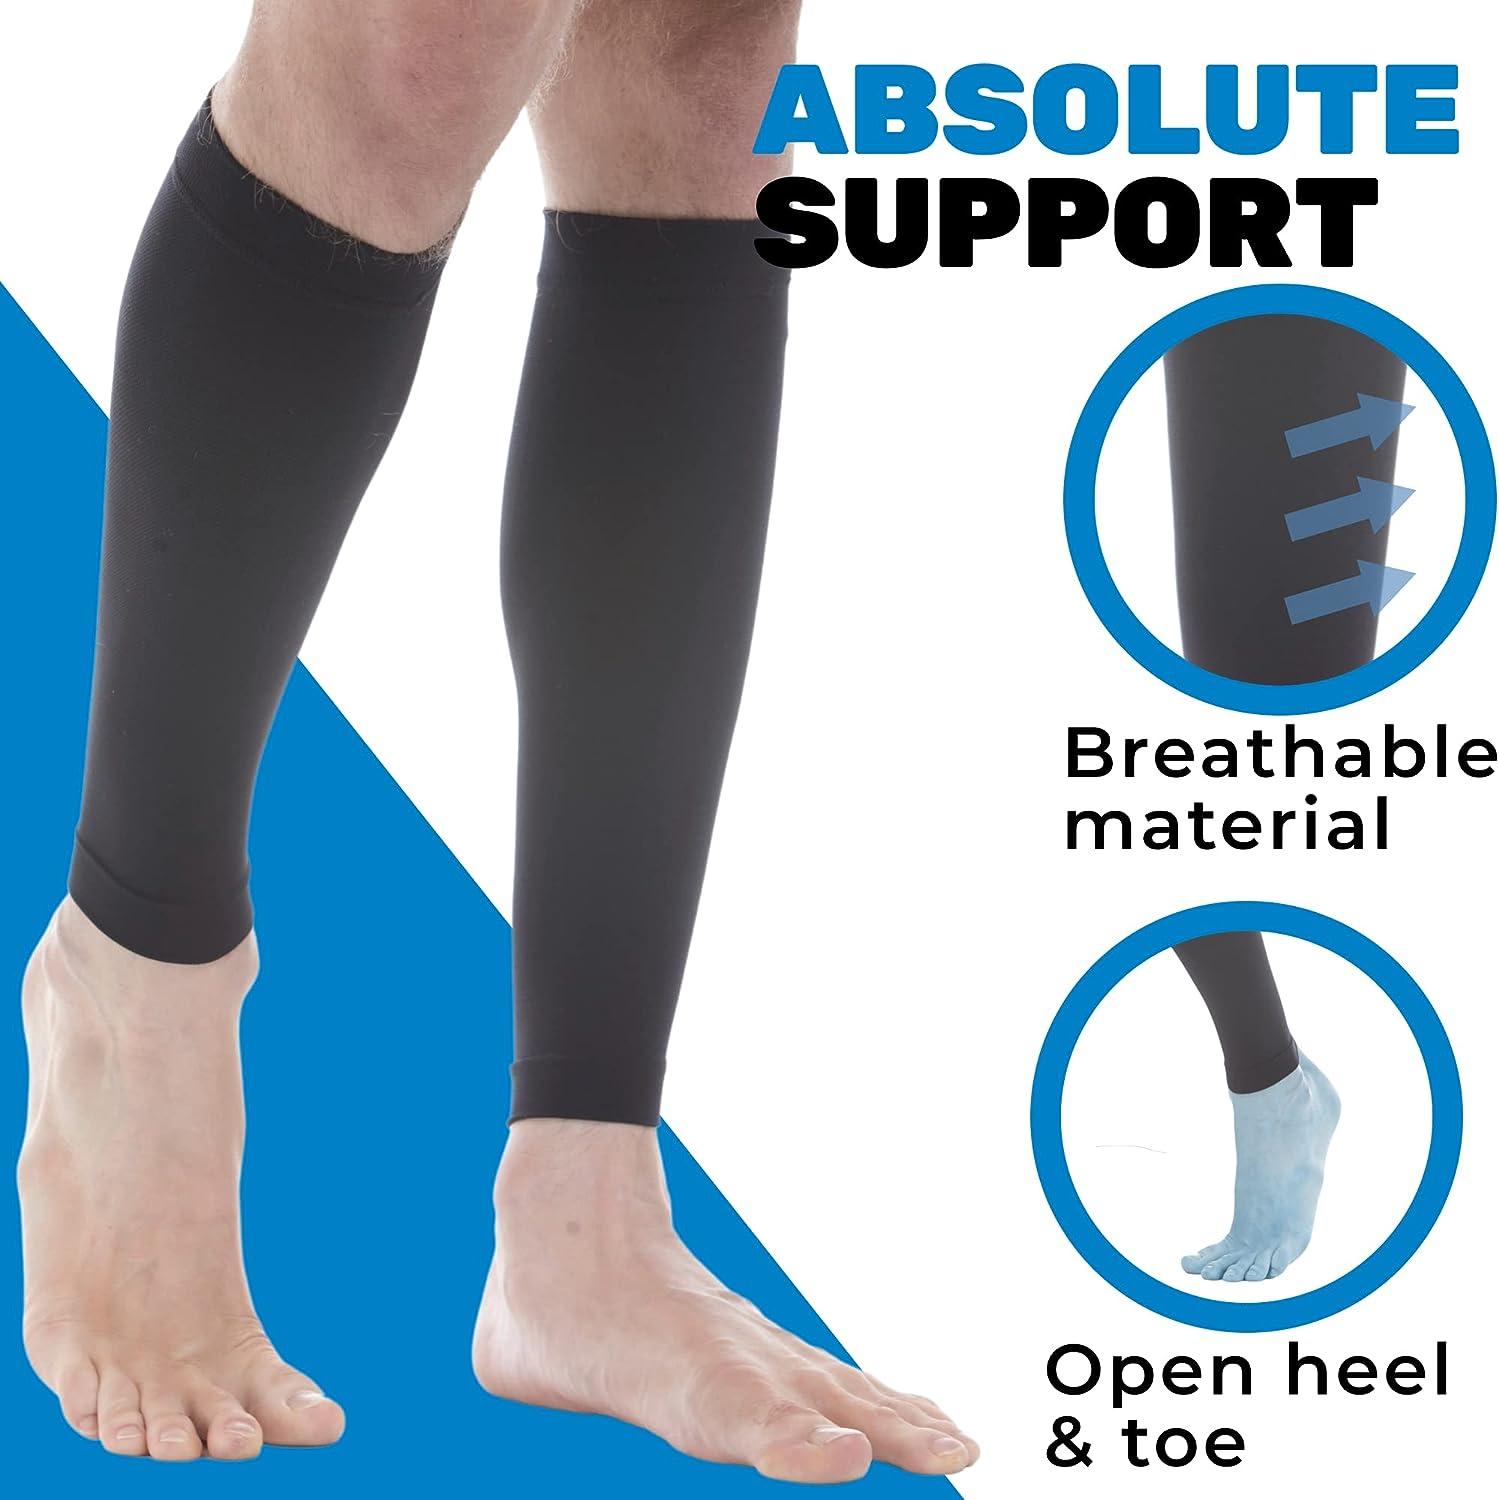 MGANG Calf Compression Sleeve, (2 Pairs) 20-30mmHg Leg Compression Socks,  Unisex for Pain Relief, Swelling, Edema, Maternity, Varicose Veins, Shin